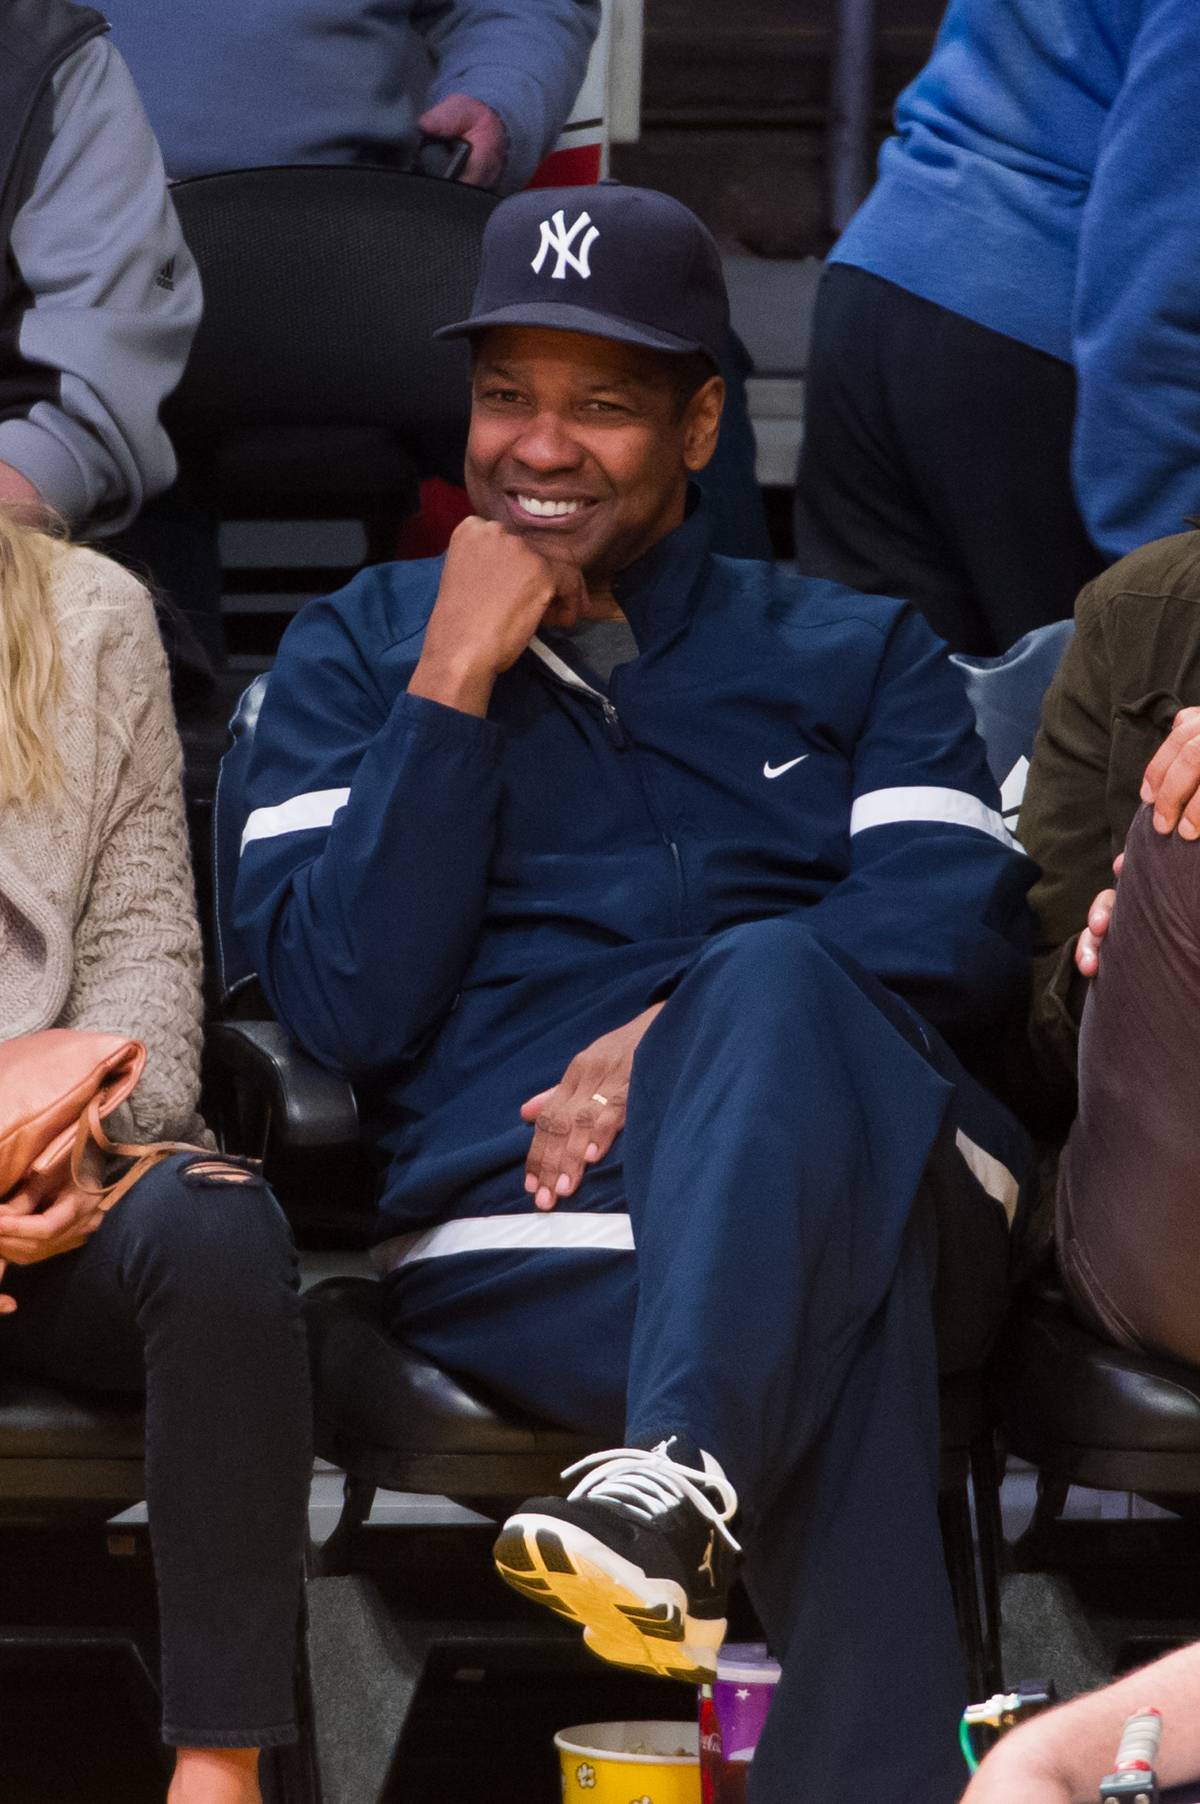 Denzel Washington Played Basketball For A Club And His School